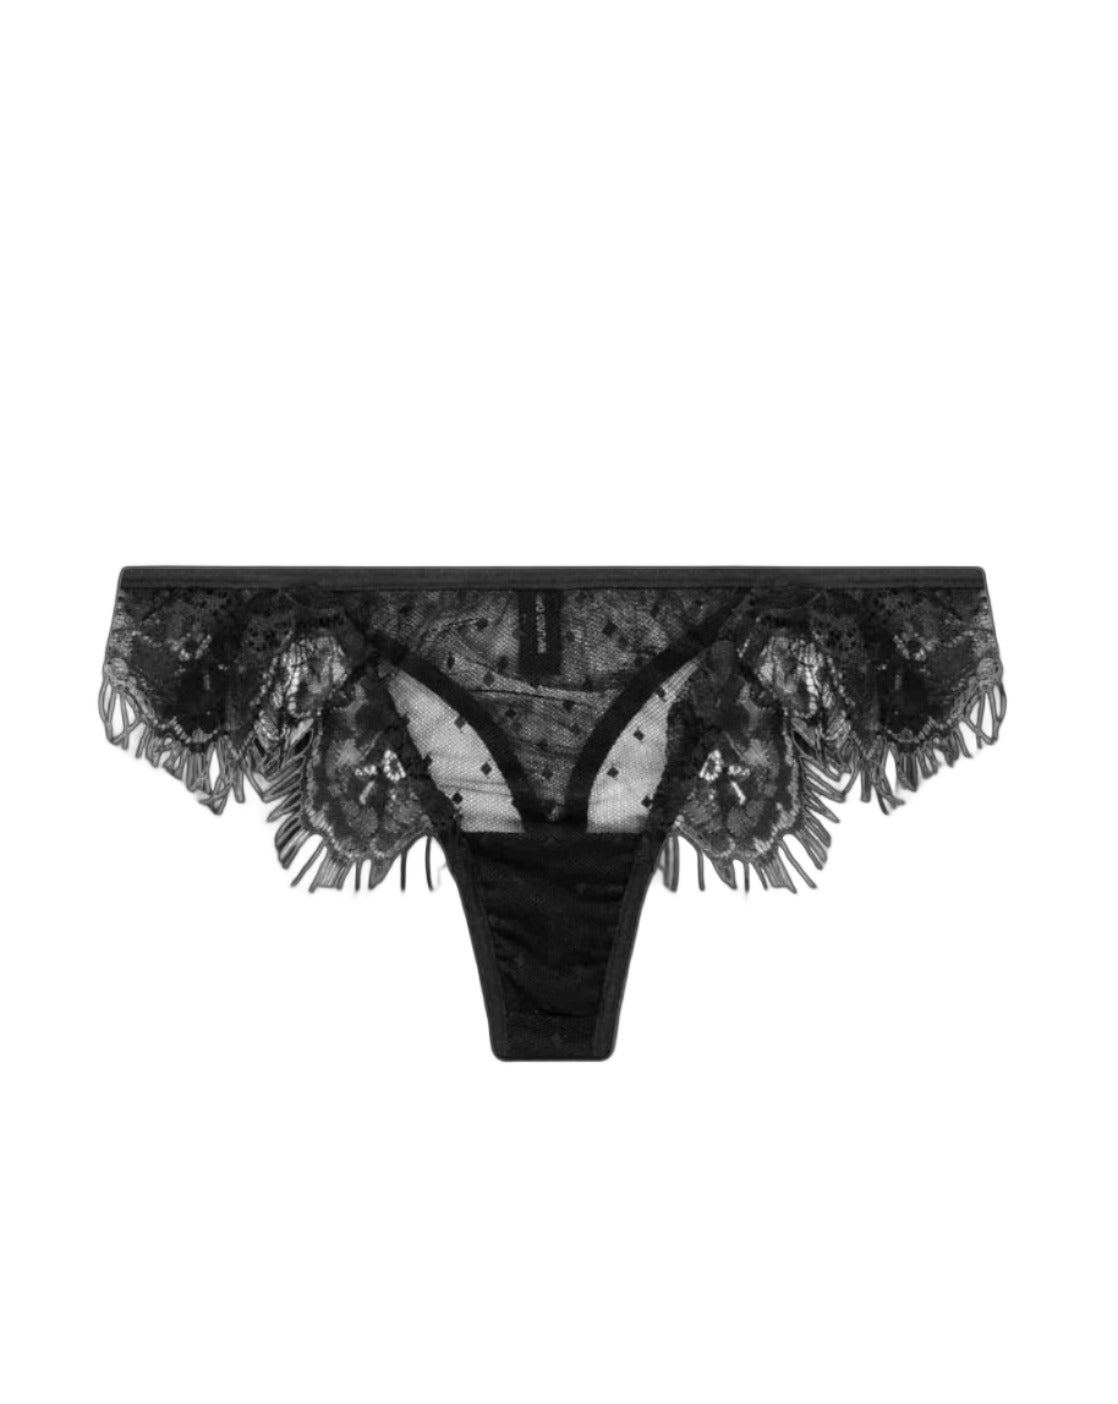 Thongs collection for women - Pavo Couture